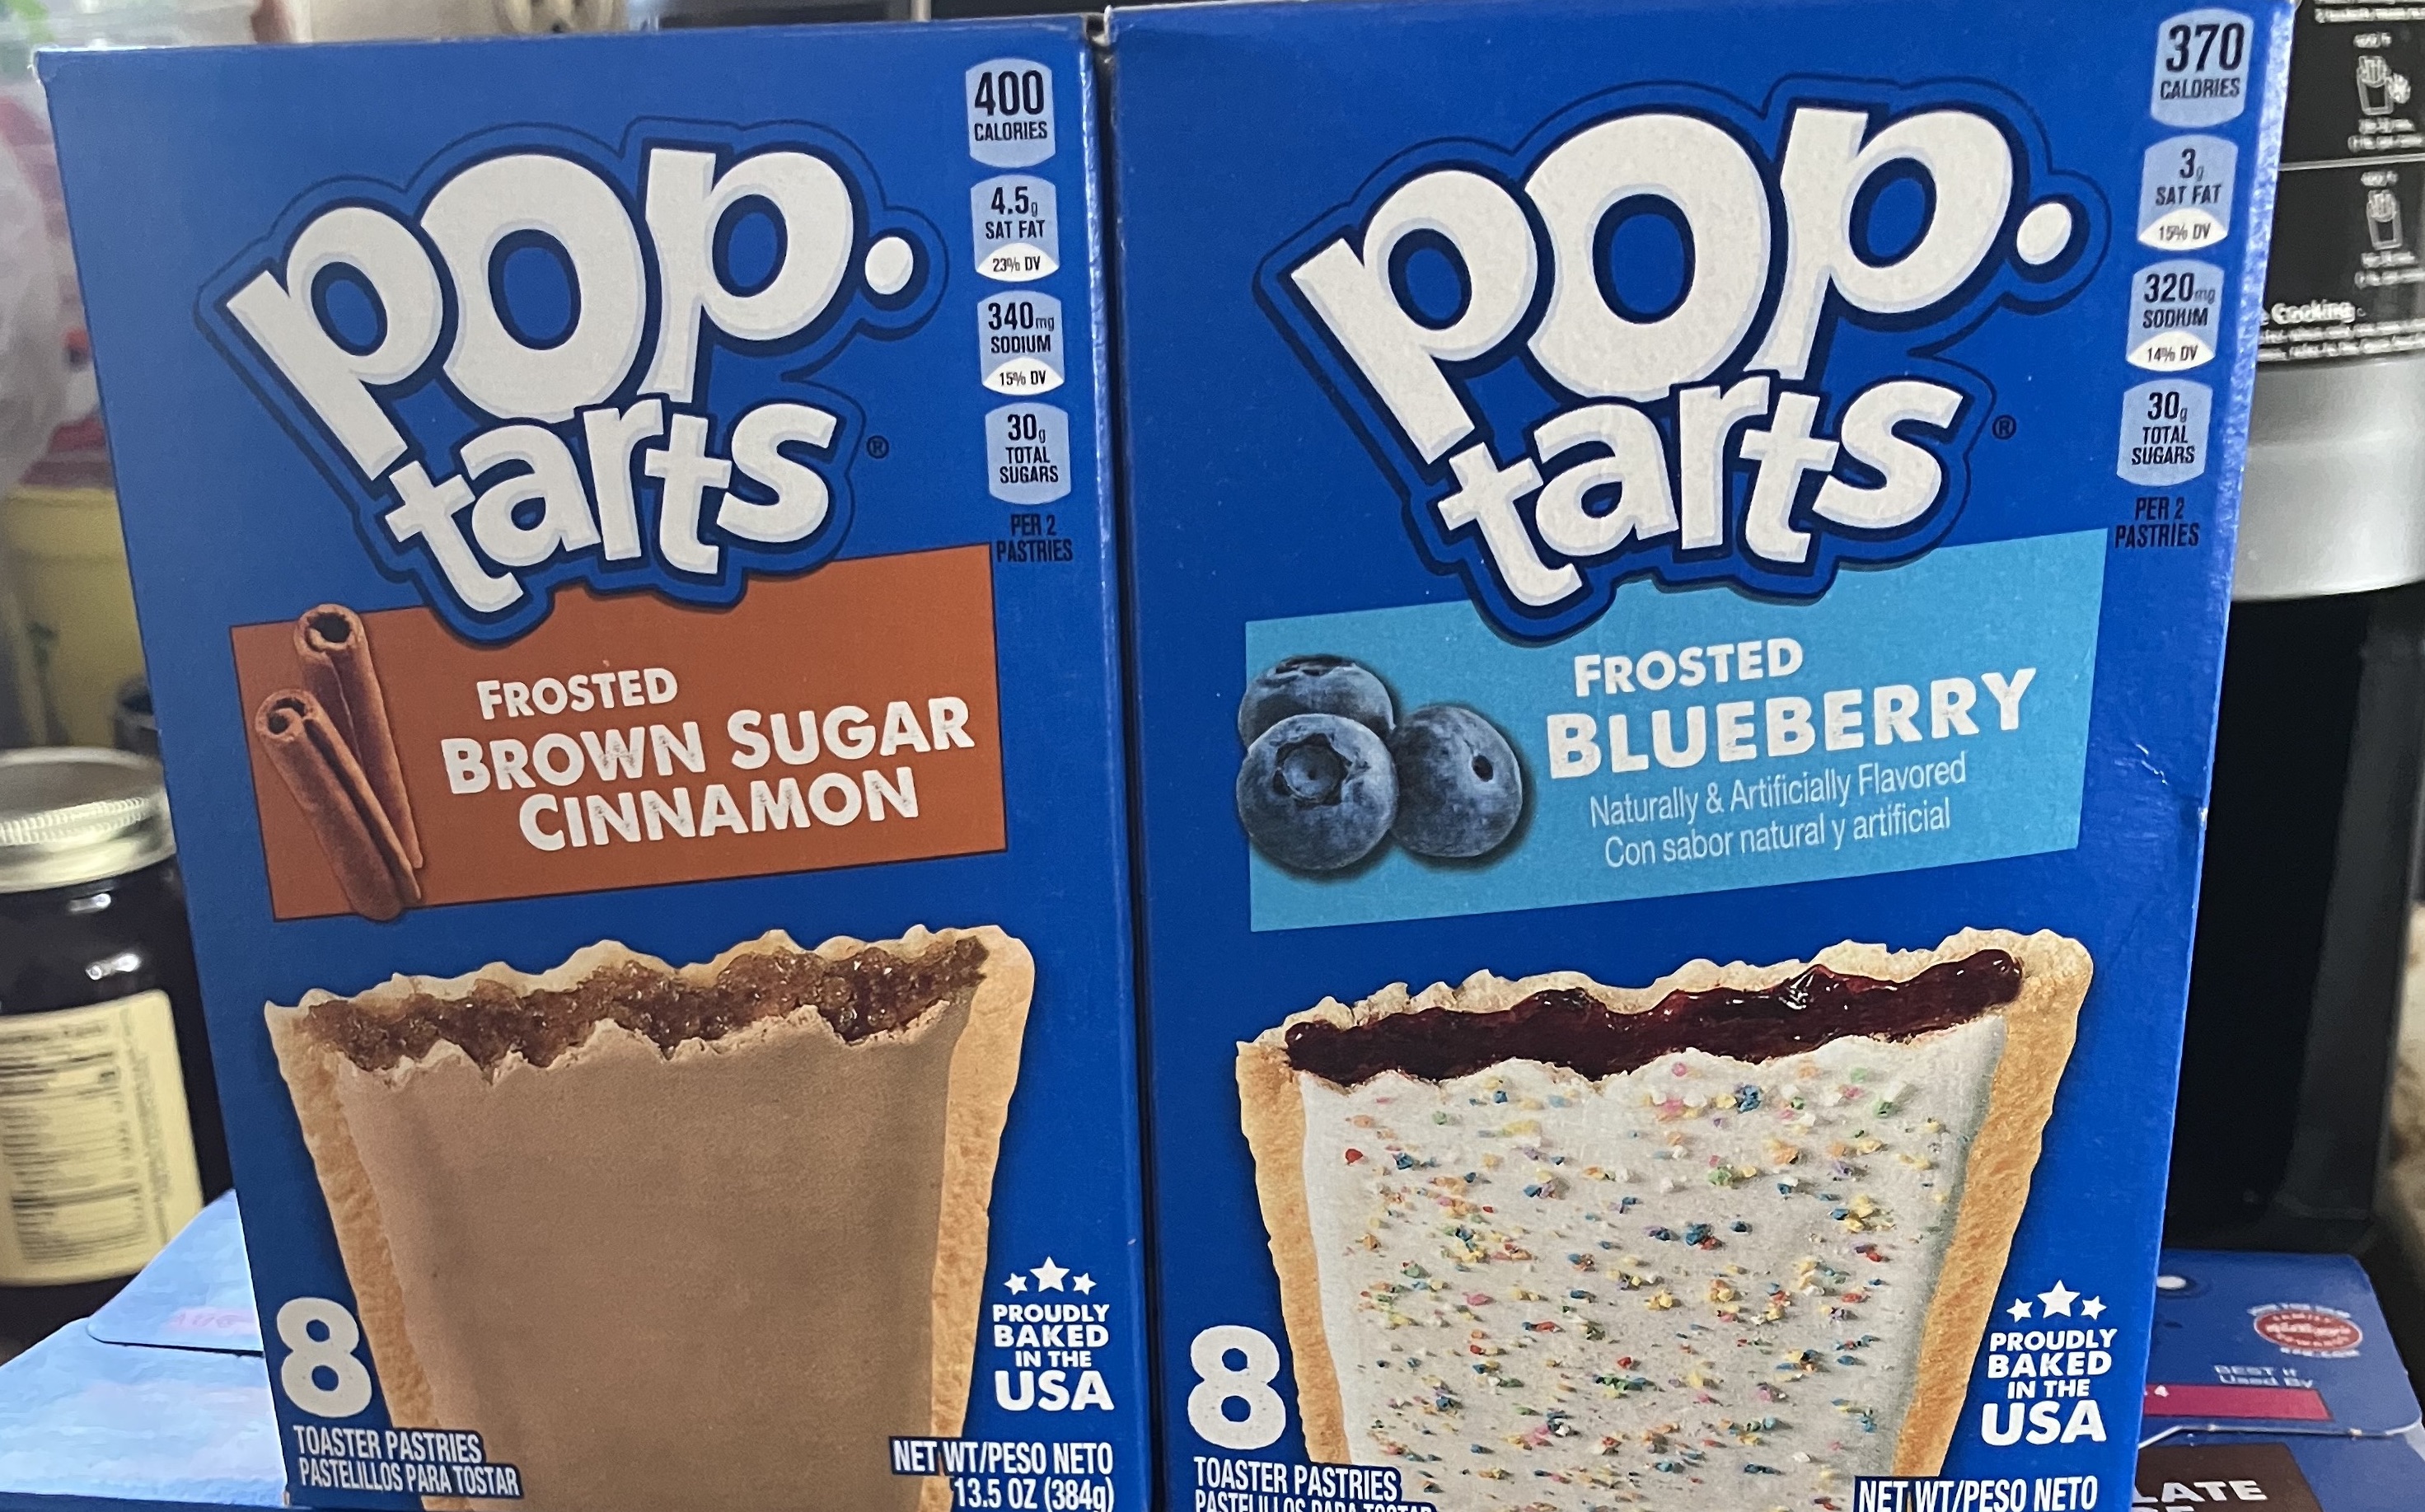 Pop-Tarts Just Launched a New Brown Sugar Cinnamon-Flavored